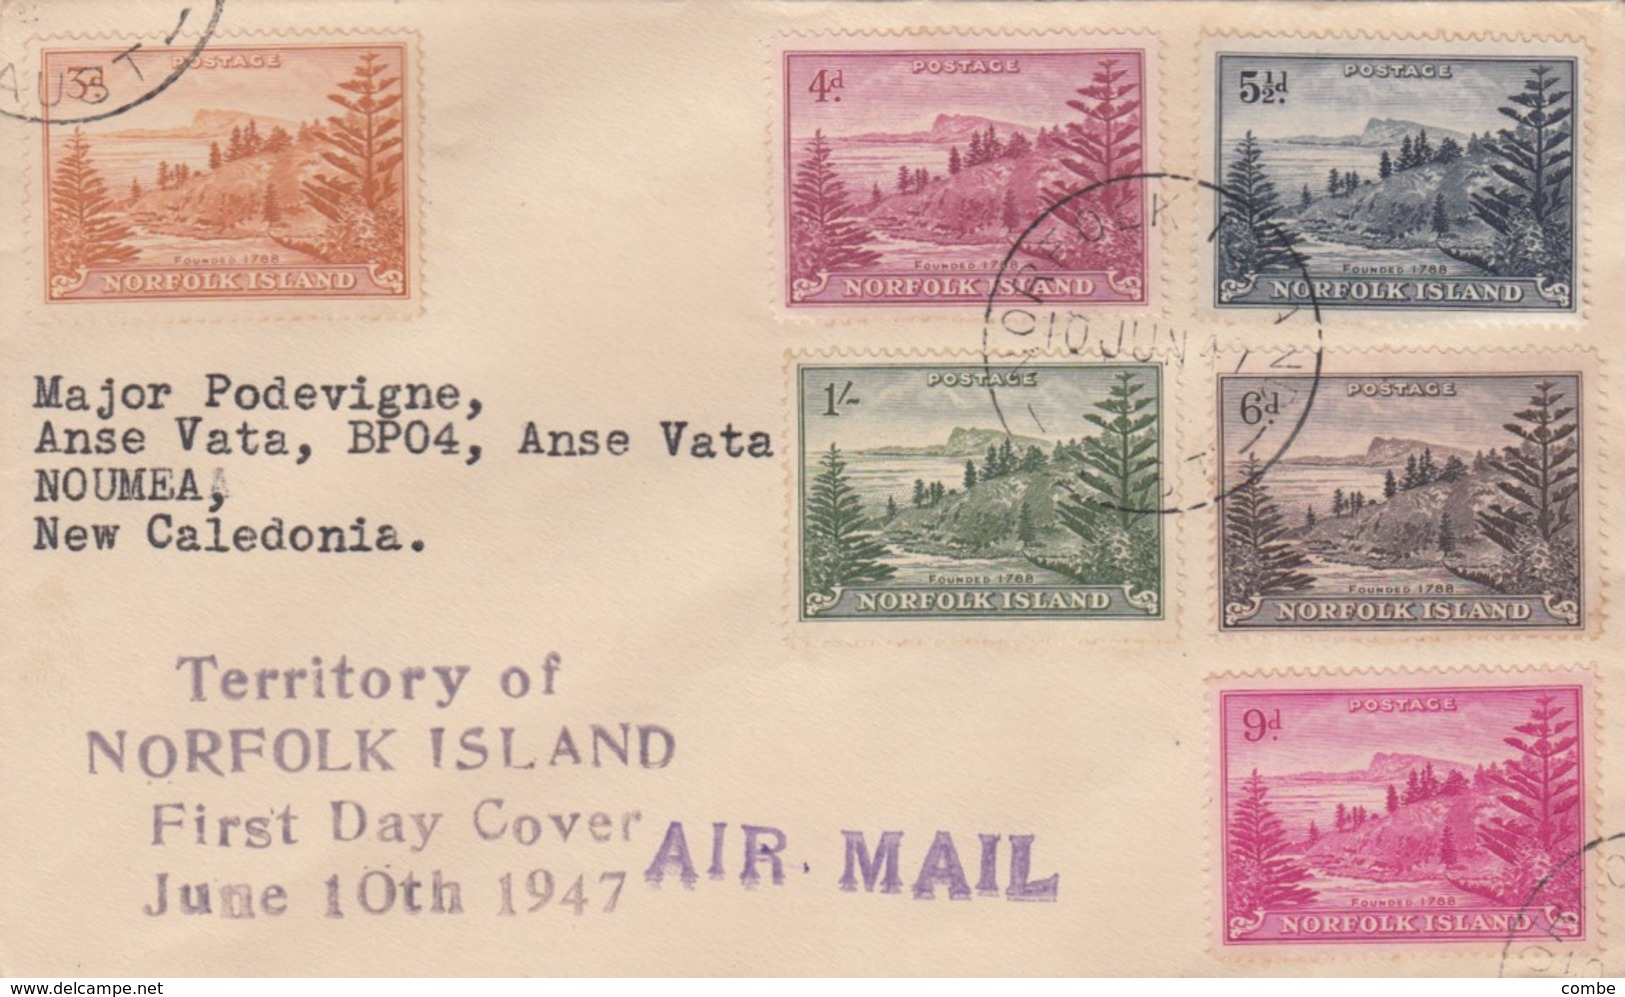 COVER. AIR MAIL. NORFOLK ISLAND. 10 JUN 47. FDC. TO NOUMEA NOUVELLE CALEDONIE - Norfolk Island